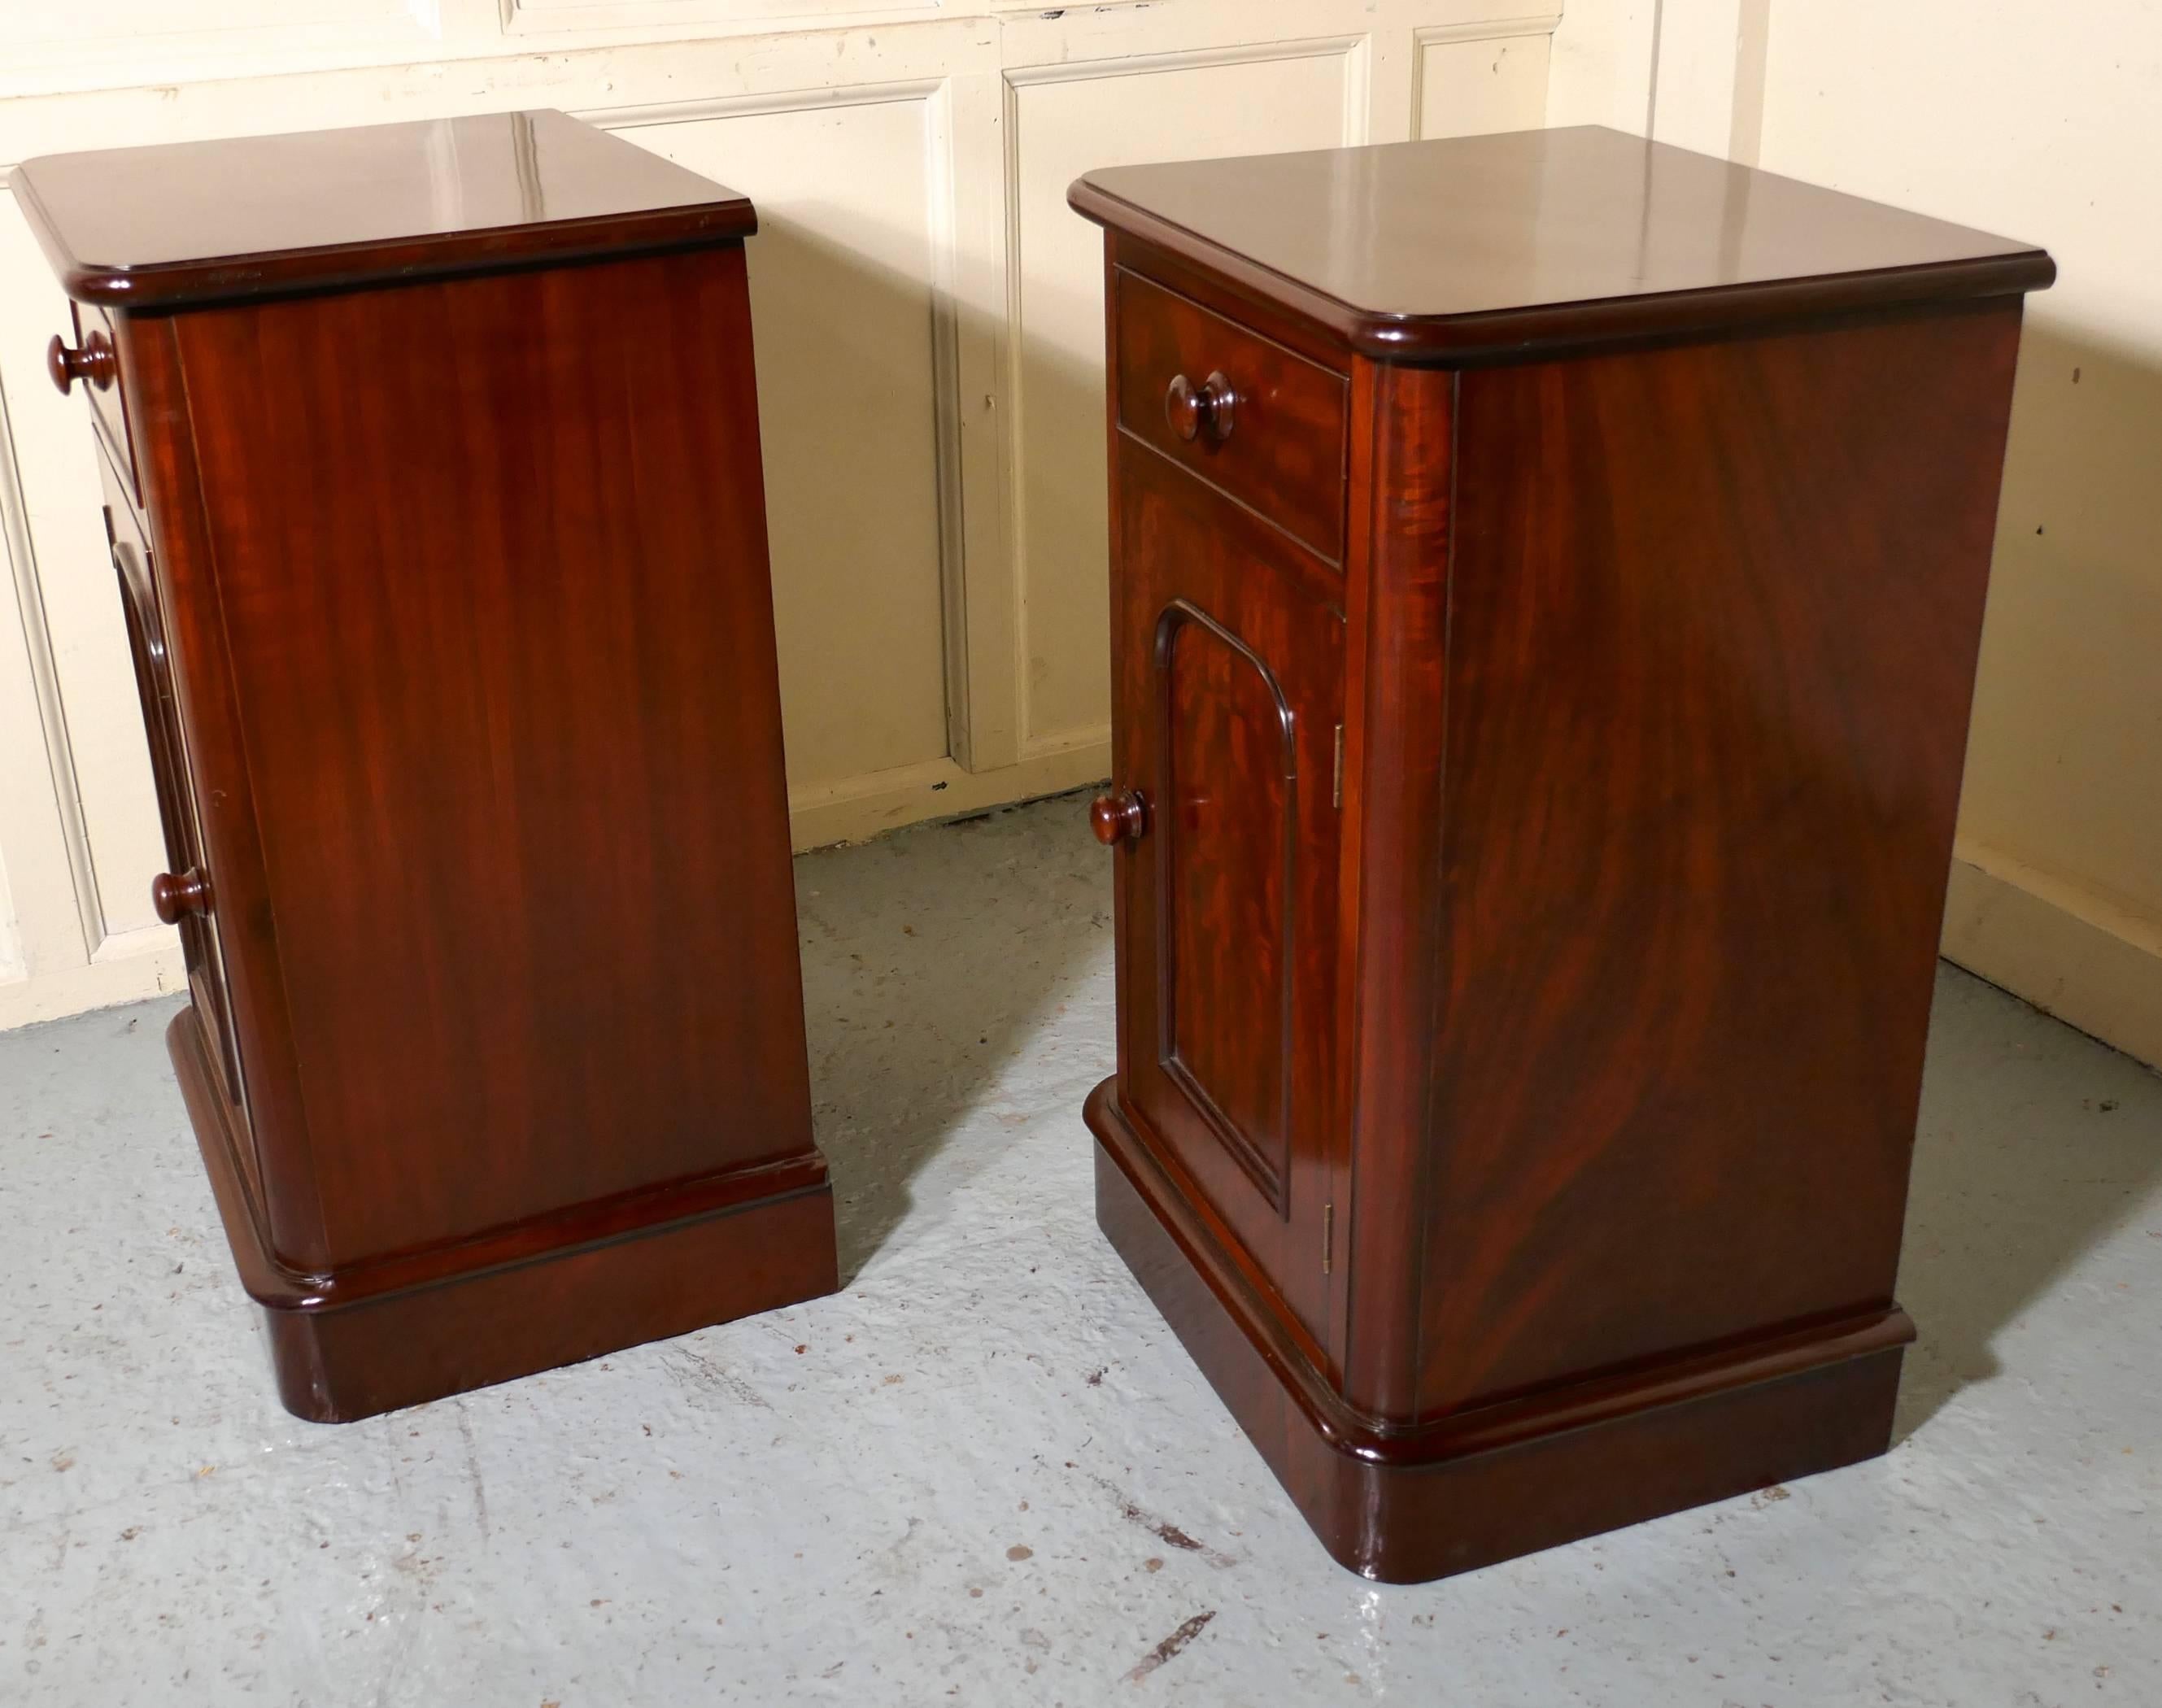 A pair of Victorian mahogany bedside cupboards

These are very good quality cabinets they are made in flame mahogany, each one has a drawer and a shelved cupboard beneath, they are true pair as the doors open in opposite directions.
The cabinets